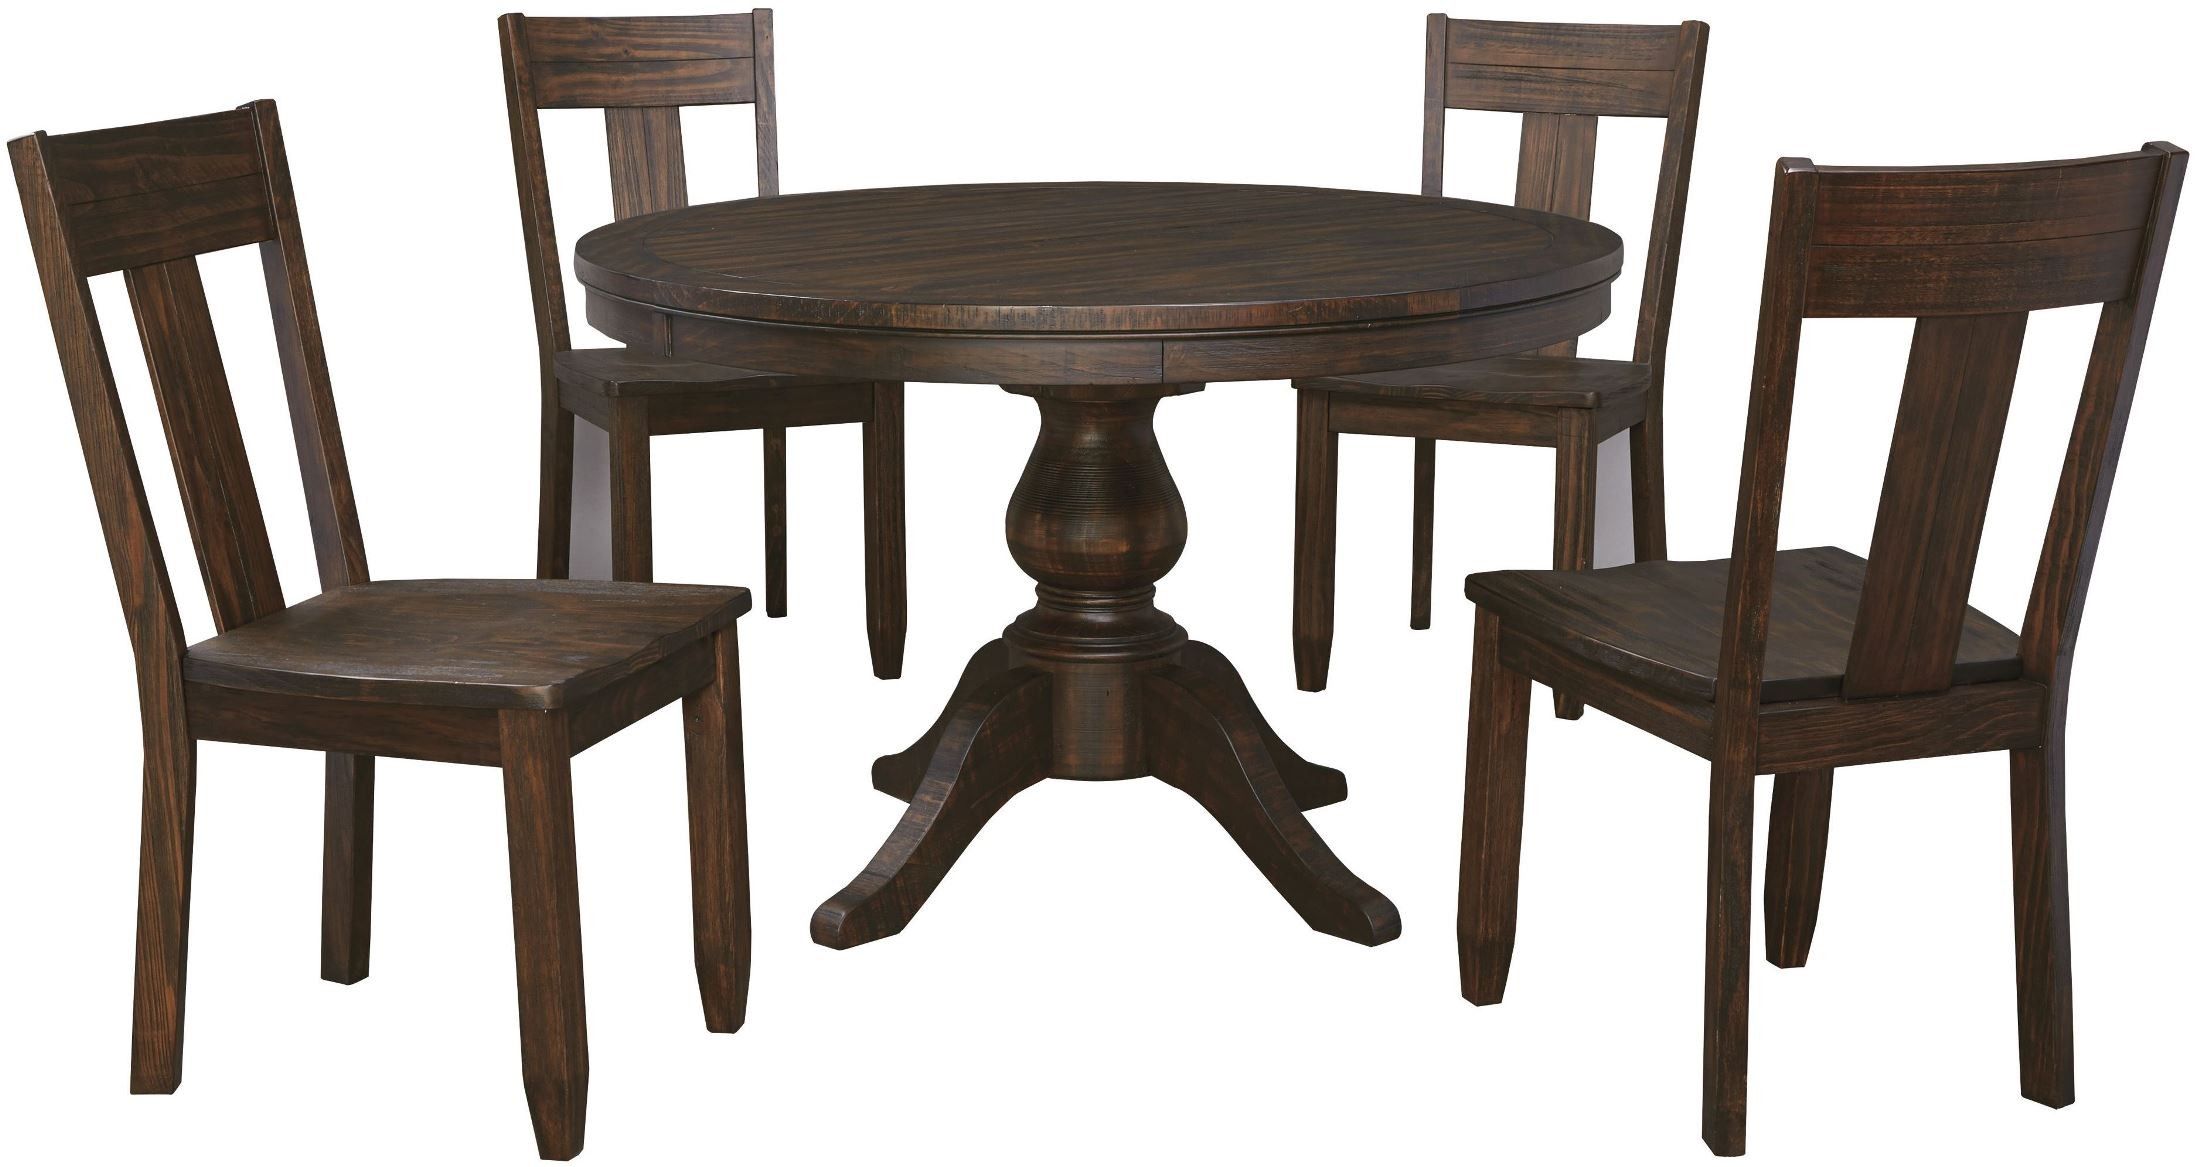 Trudell Dark Brown Round Extendable Pedestal Dining Room In Most Recent Dark Brown Round Dining Tables (View 7 of 15)